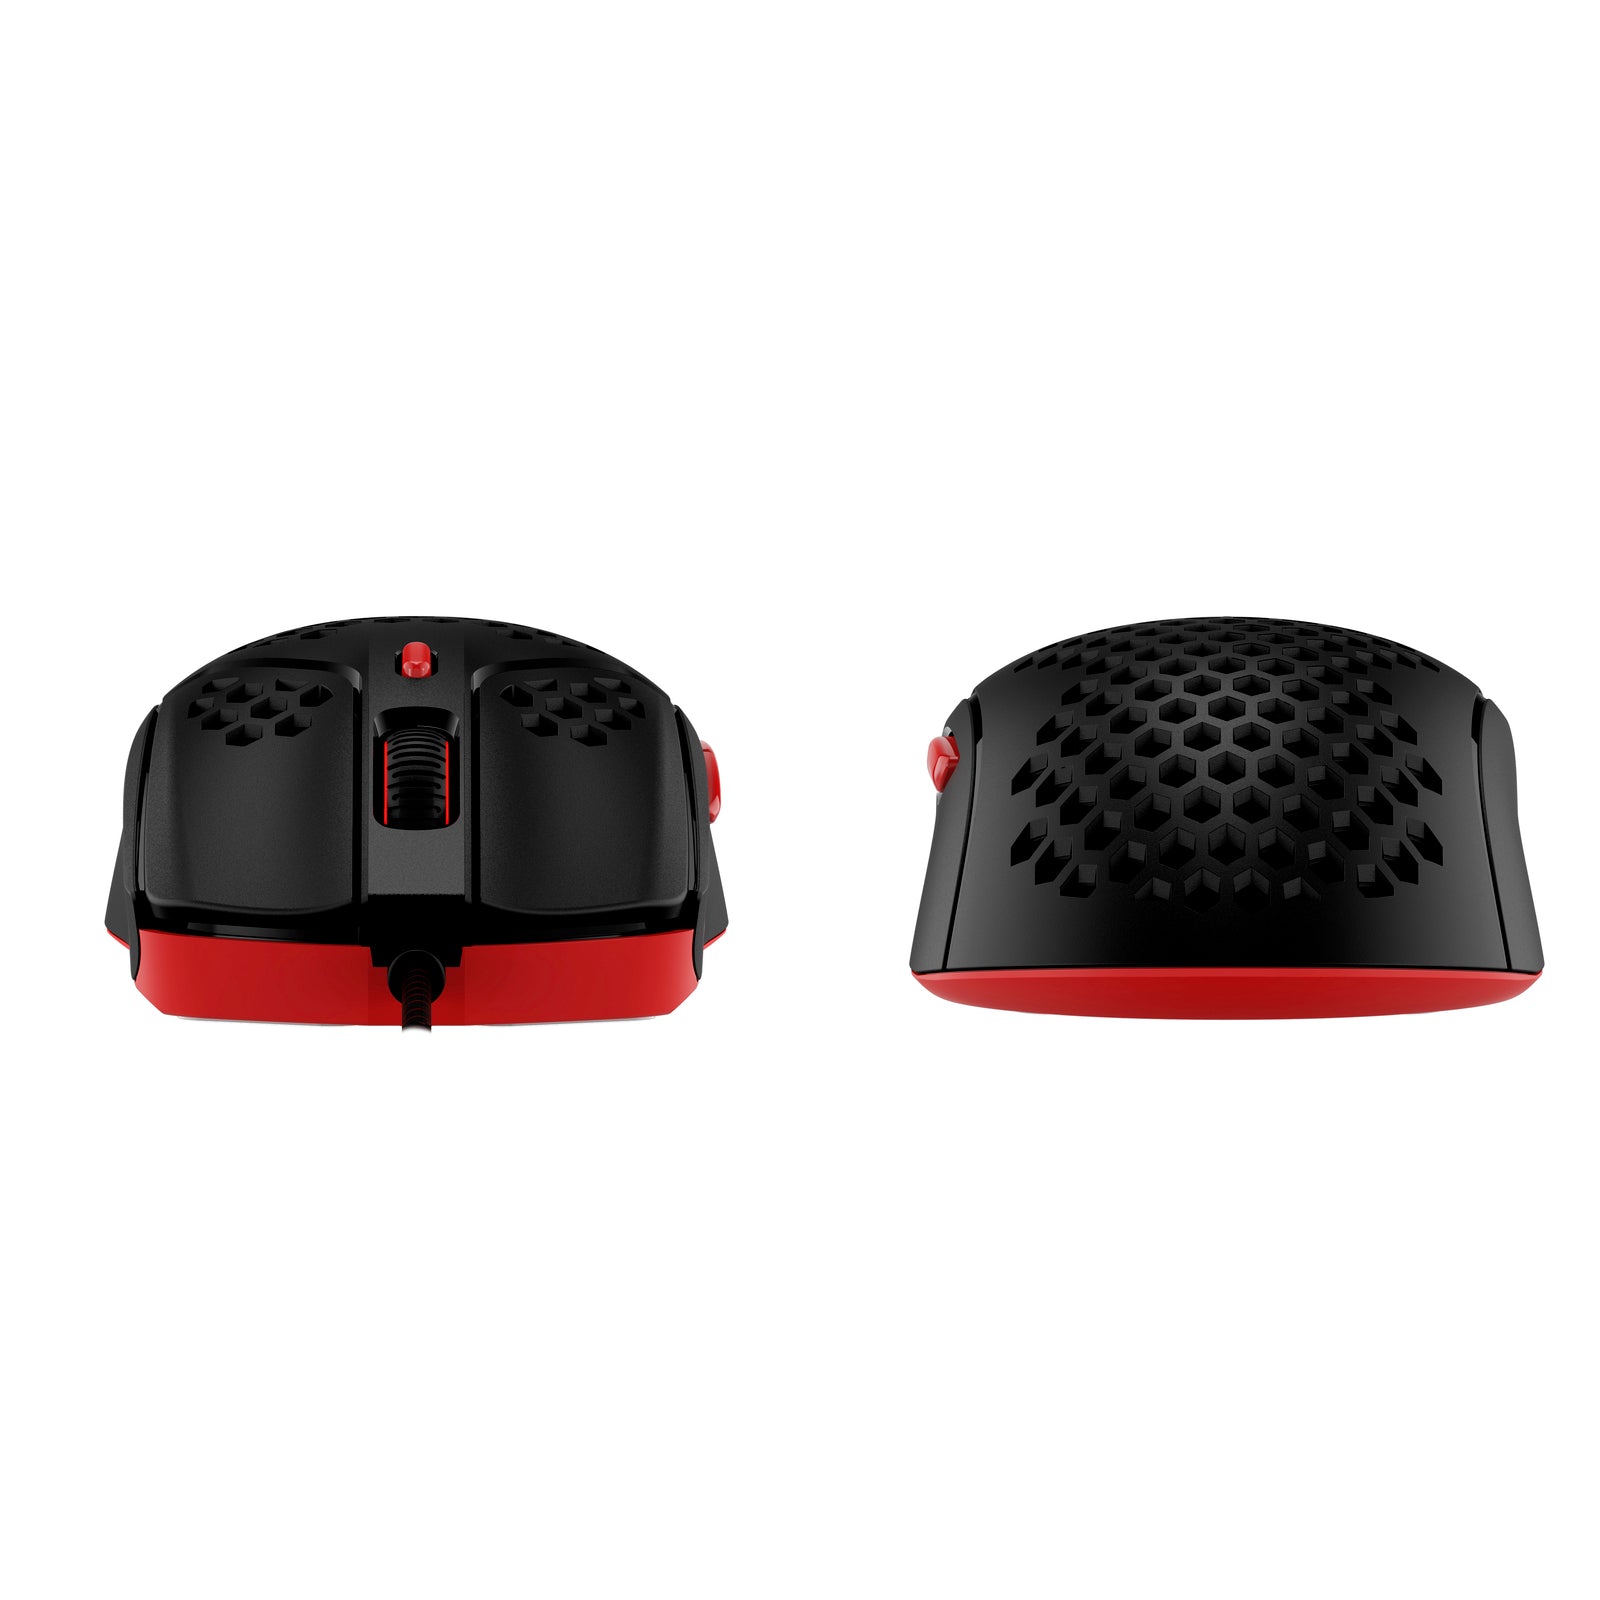 HyperX Pulsefire Haste Red-Black Gaming Mouse - front and back view